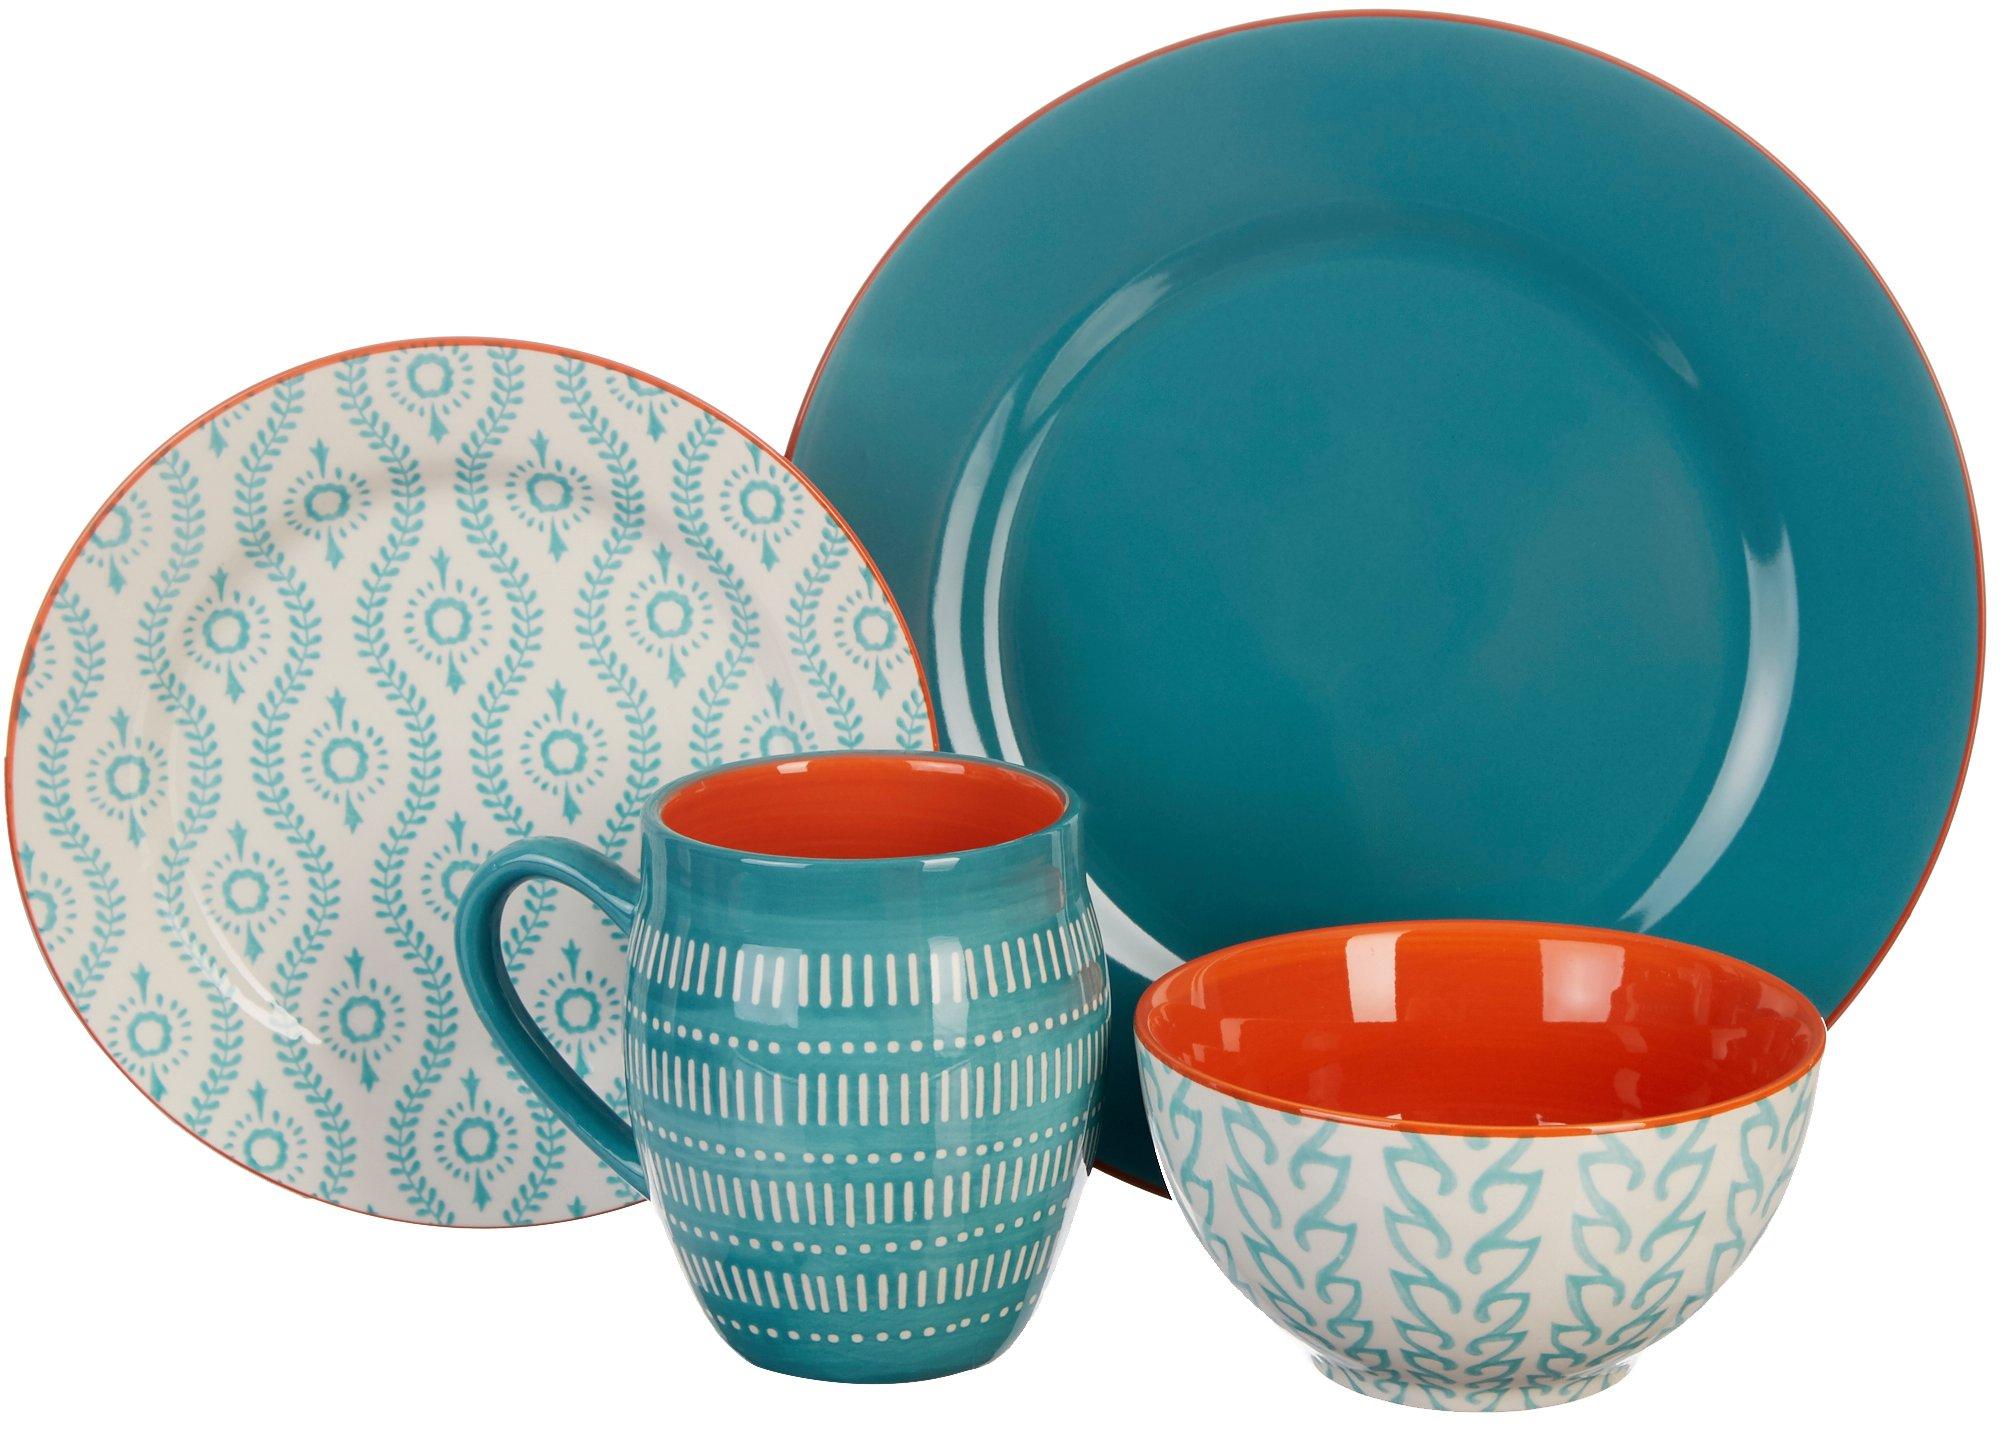 Baum Brothers 16-pc. Tangiers Turquoise Dinnerware Set